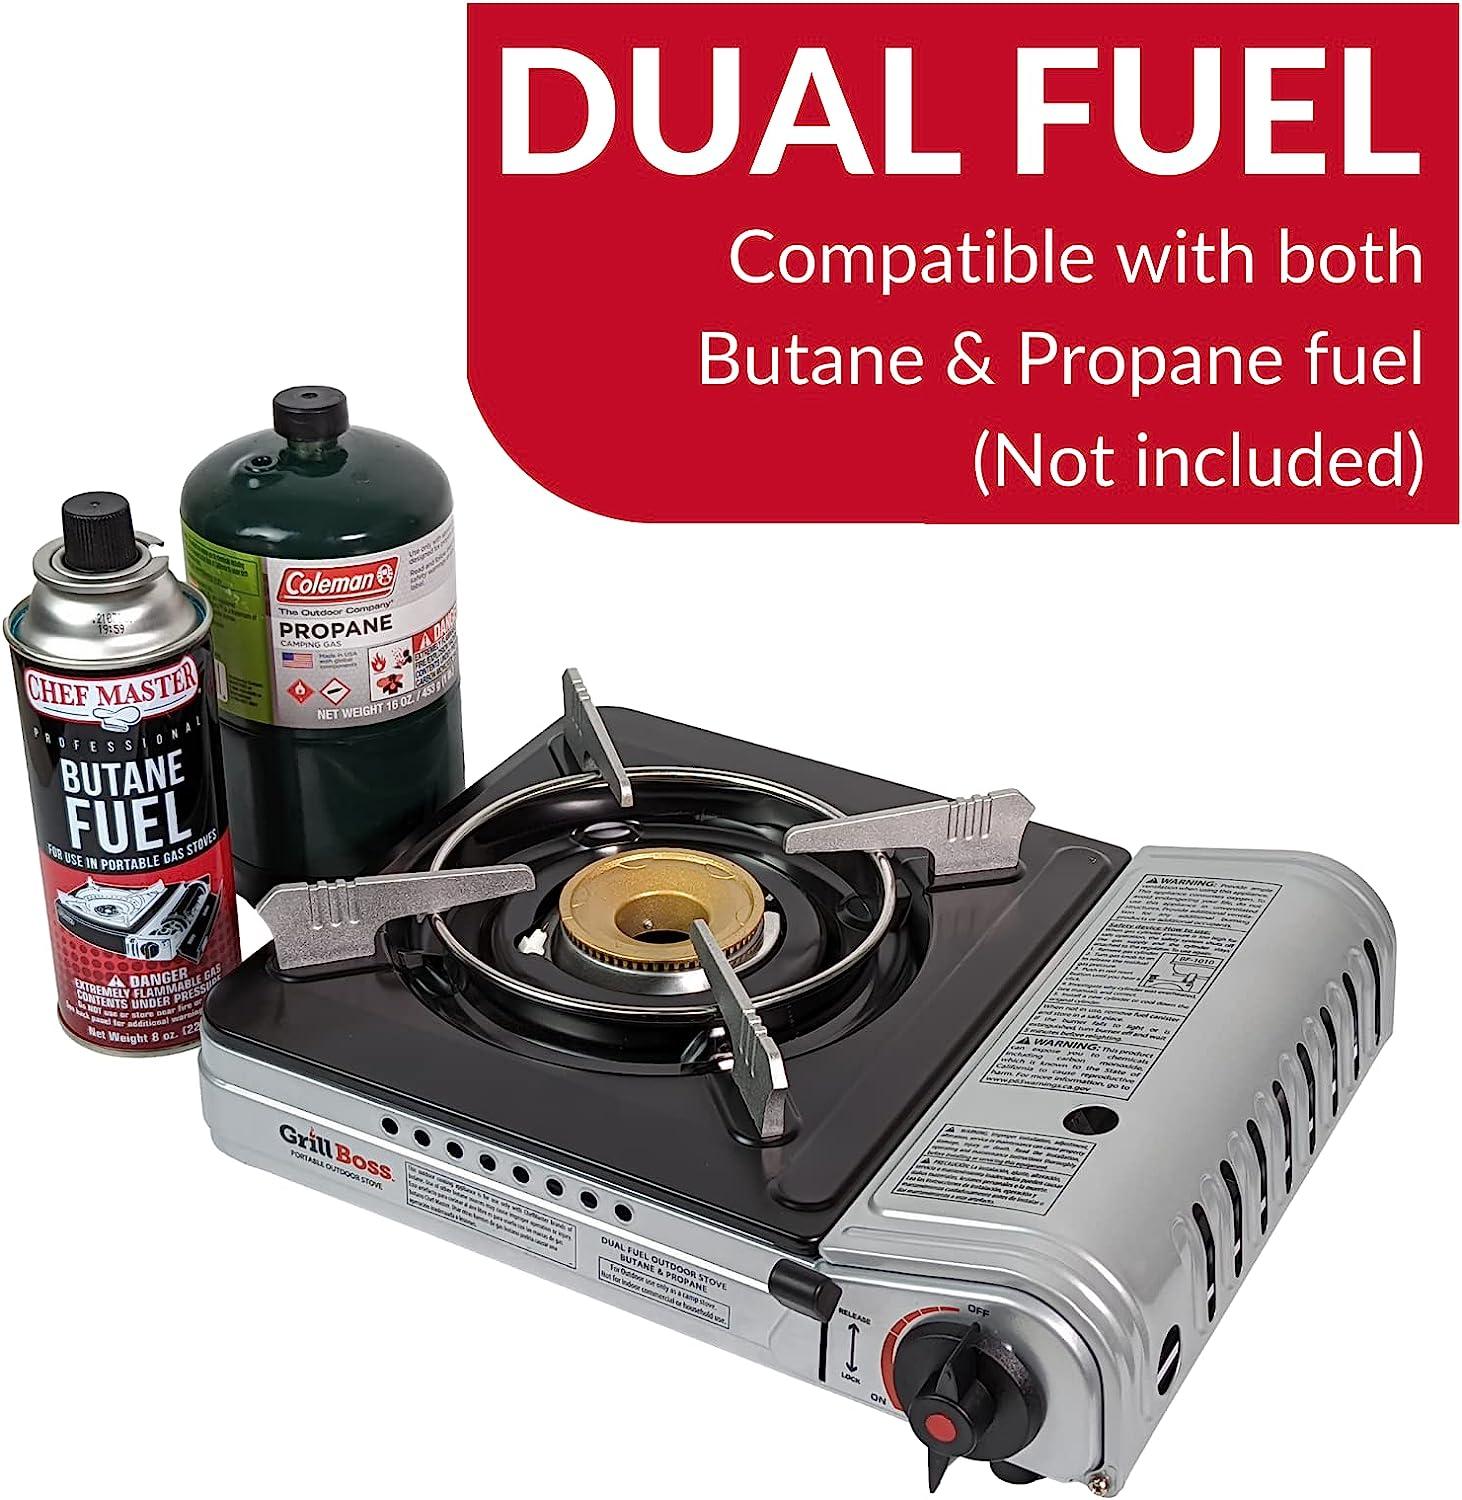 Grill Boss 90057 Dual Fuel Camp Stove, Works with both Butane and Propane, Perfect for Camping & Hiking, Emergency Cooking Stove, Single Burner  12k BTU Output